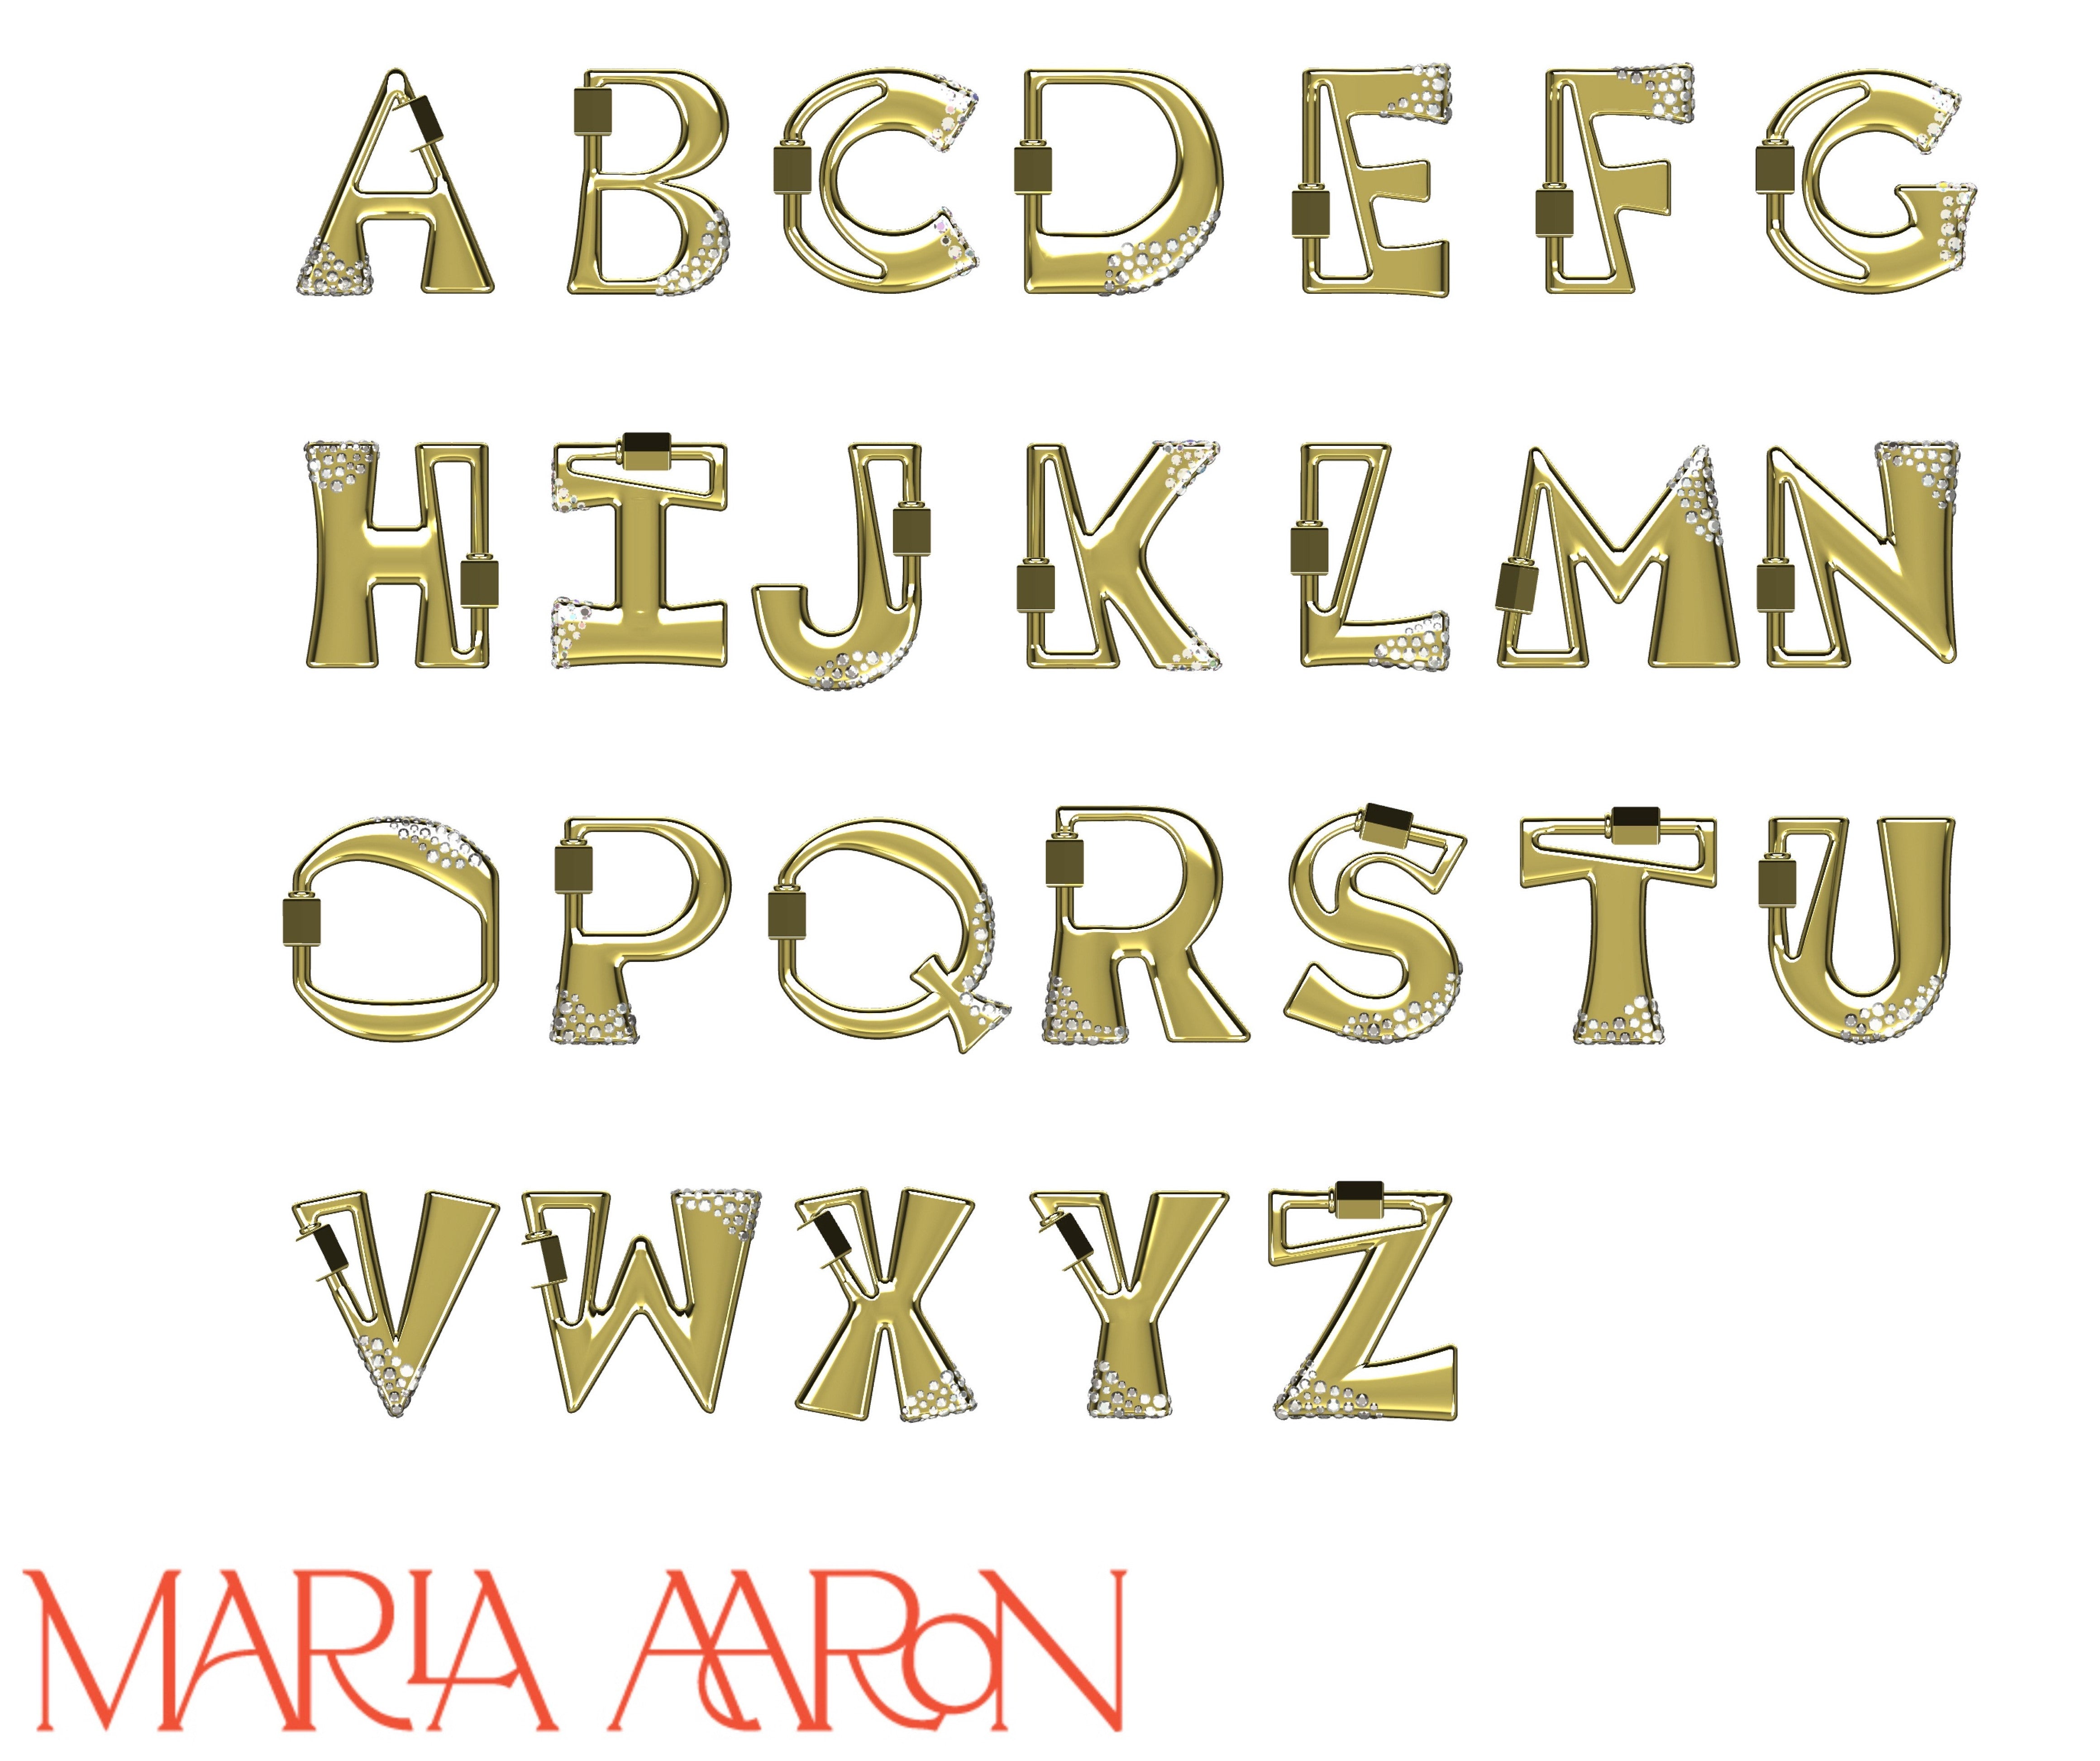 Gold locks of every letter of the alphabet including G charm against white backdrop with Marla Aaron logo in bottom left corner